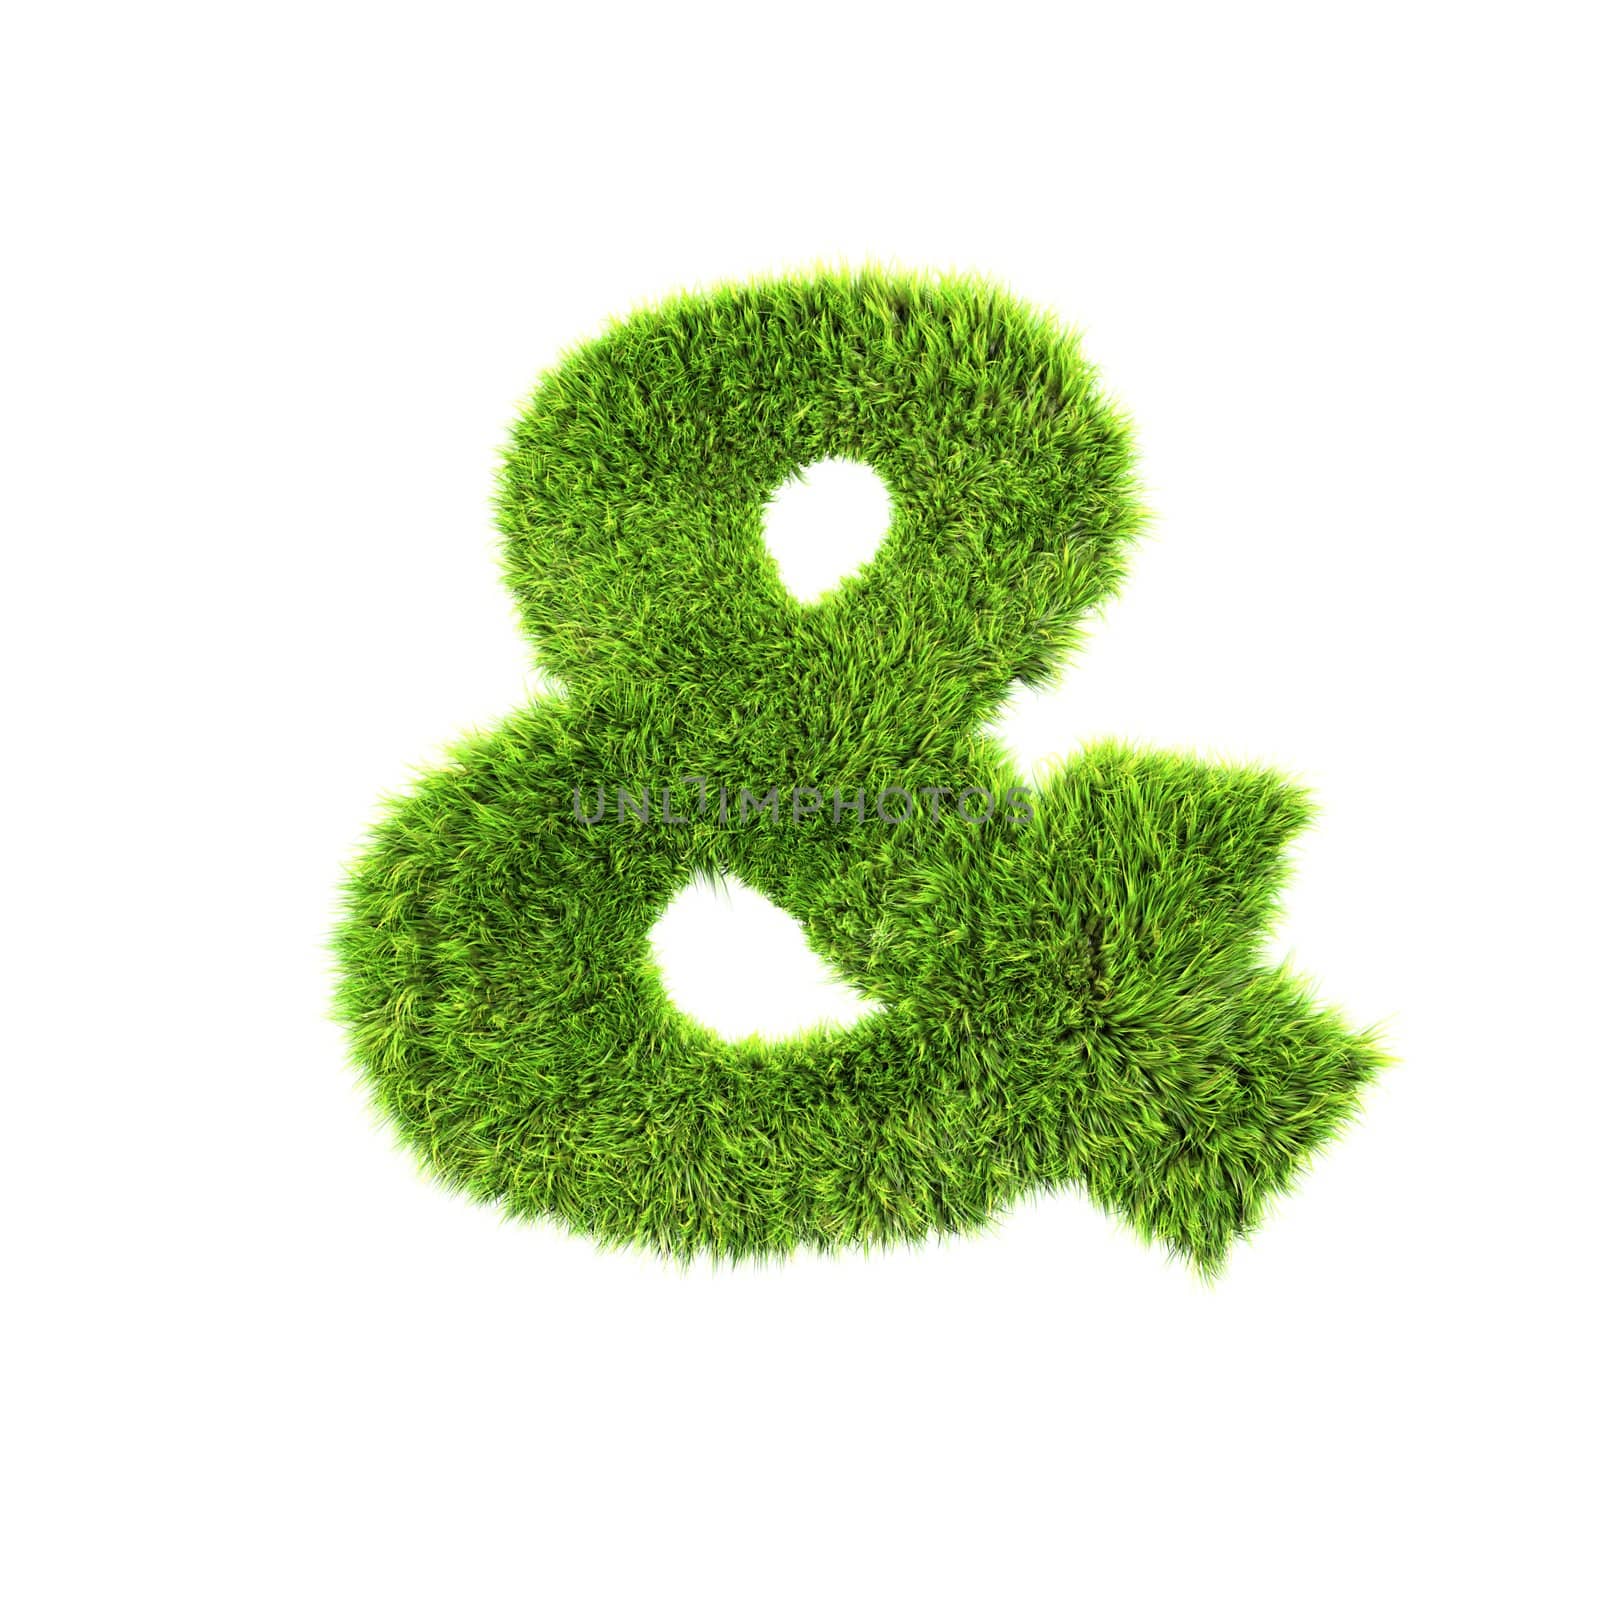 3d grass sign isolated on white background - & by chrisroll